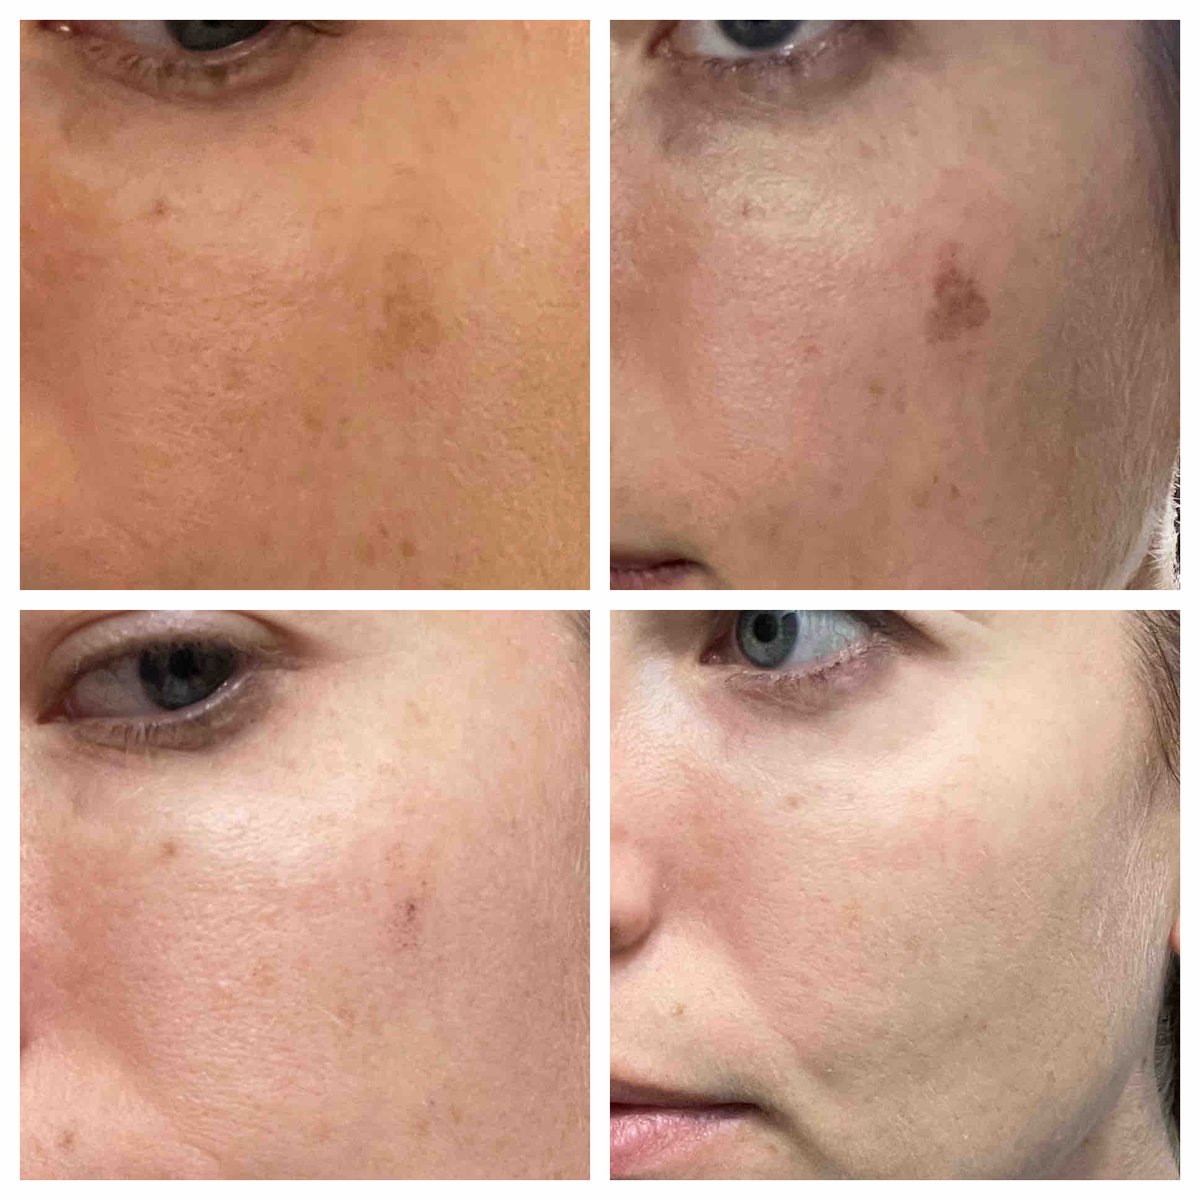 We eliminated her #hyperpigmentation with our #Quanta #Evo4 #laser. People still have laser treatments in the #summer. 😎 We do ask that you regularly reapply a good #sunscreen like #Epionce and wear a hat when out in the sun. #drannetrussell #seibellamedspa 501-228-6237